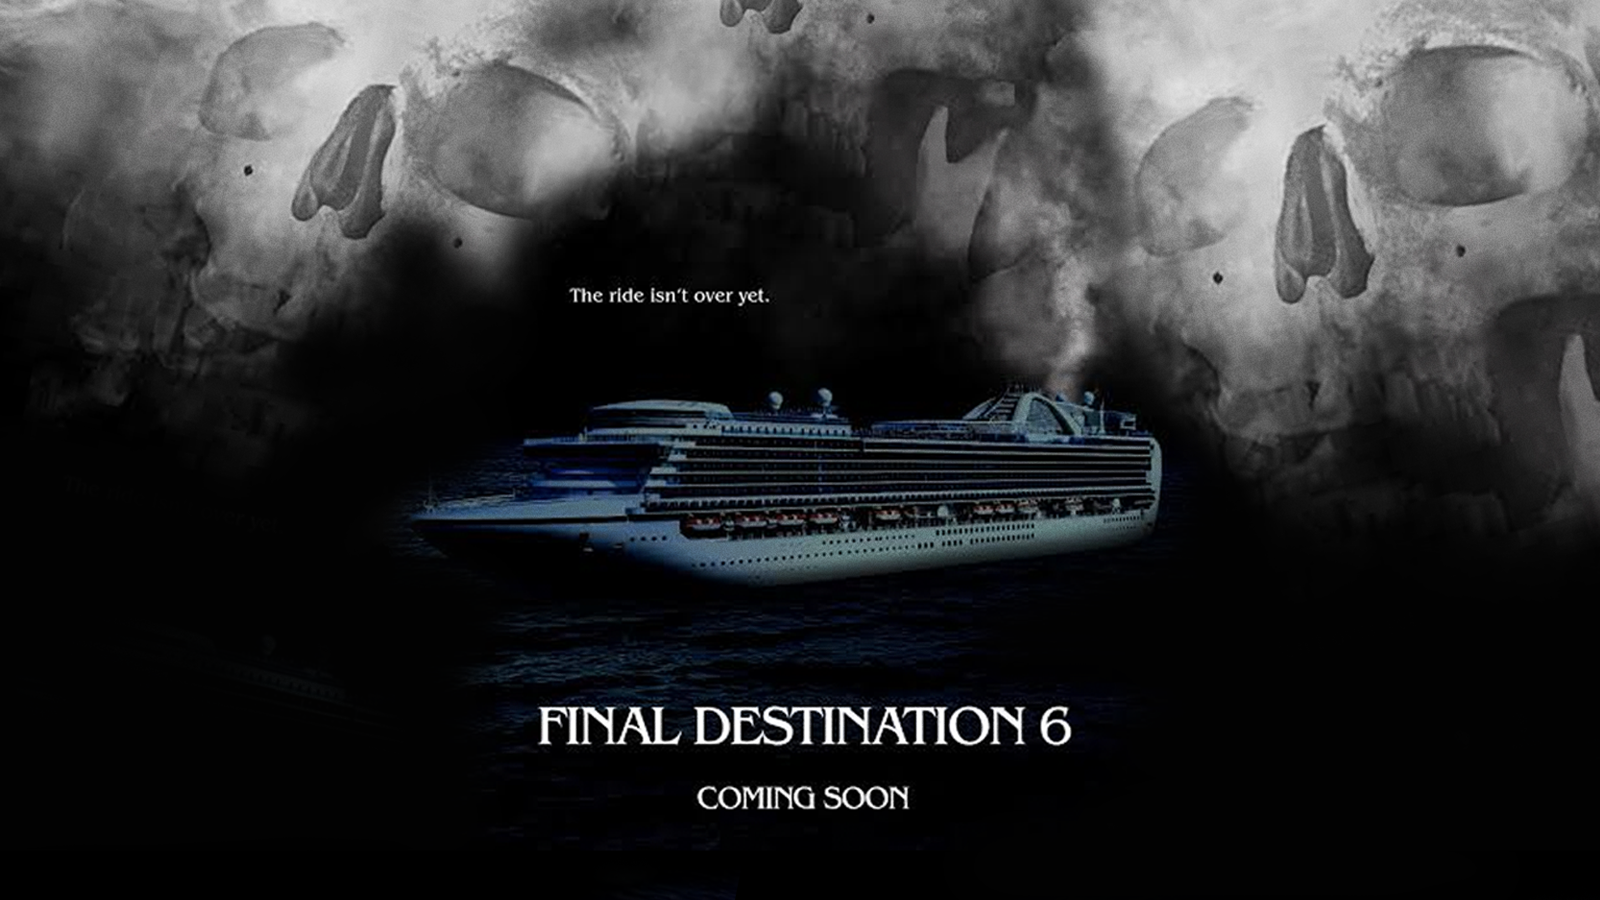 Final Destination 6 is happening and we can't wait to overthink on what